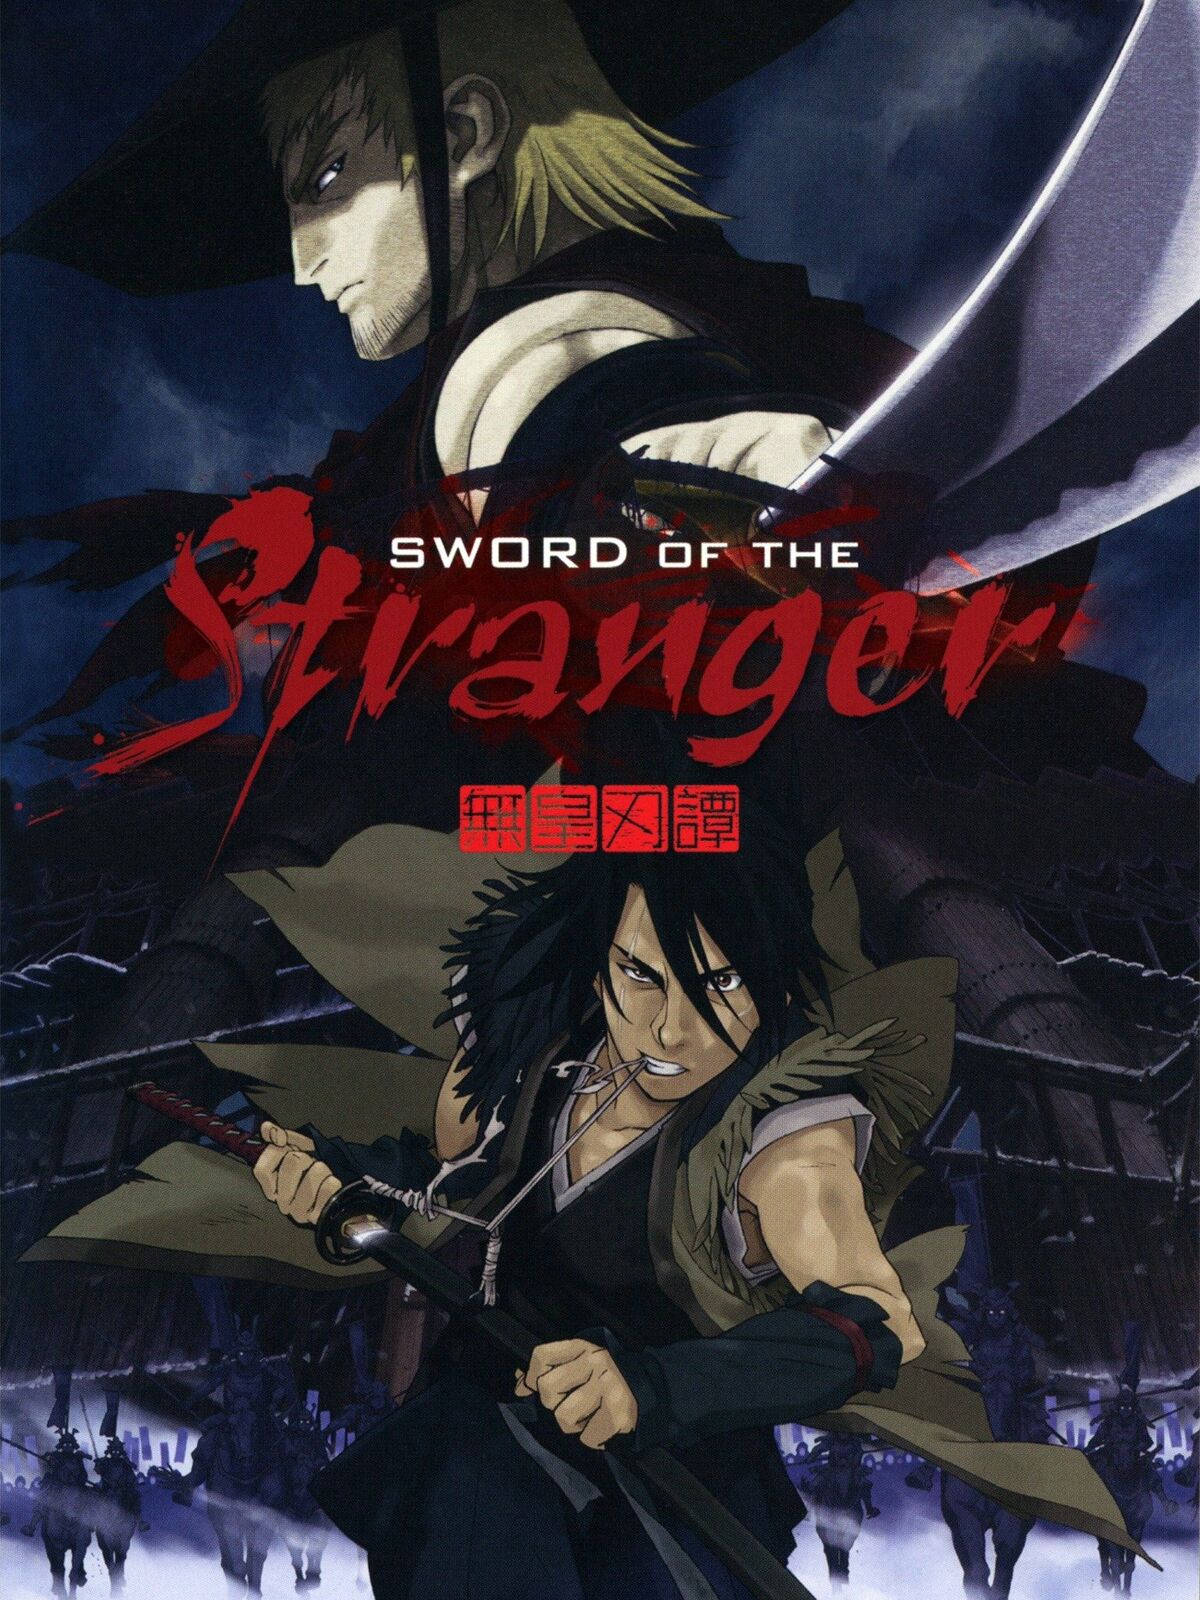 Ihojin No Yaiba (Extended Version) - Sword Of The Stranger OST 